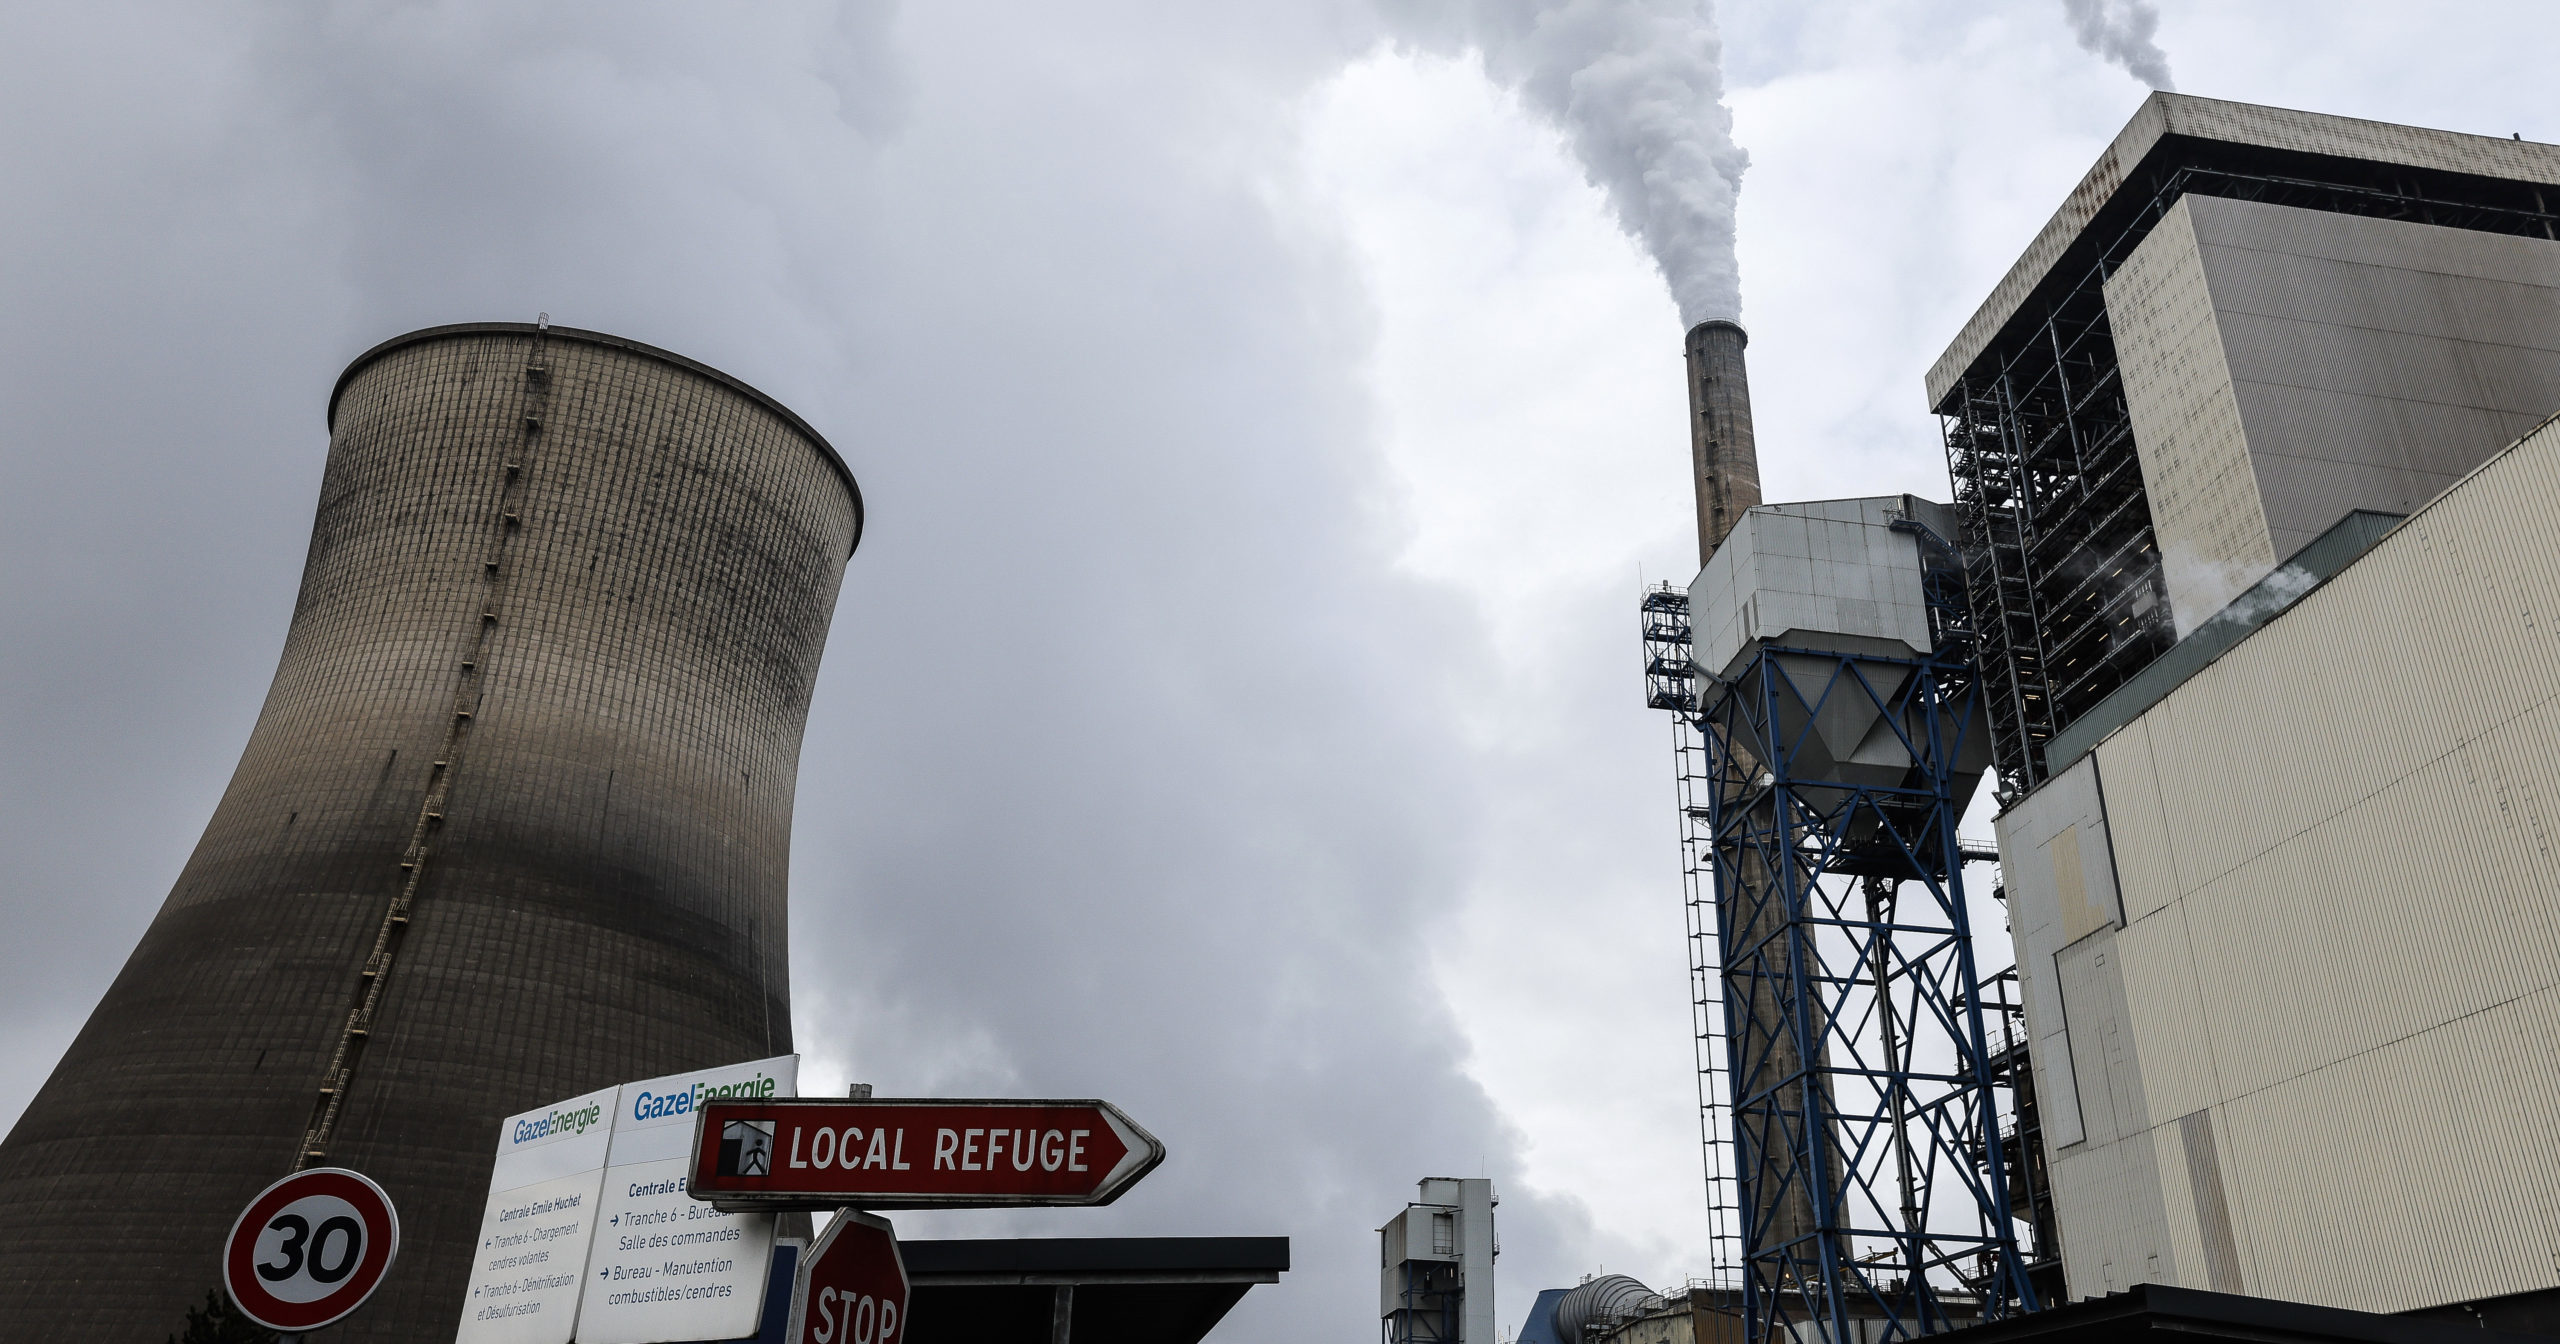 View of the coal-fired power station in Saint-Avold, France, on Tuesday.